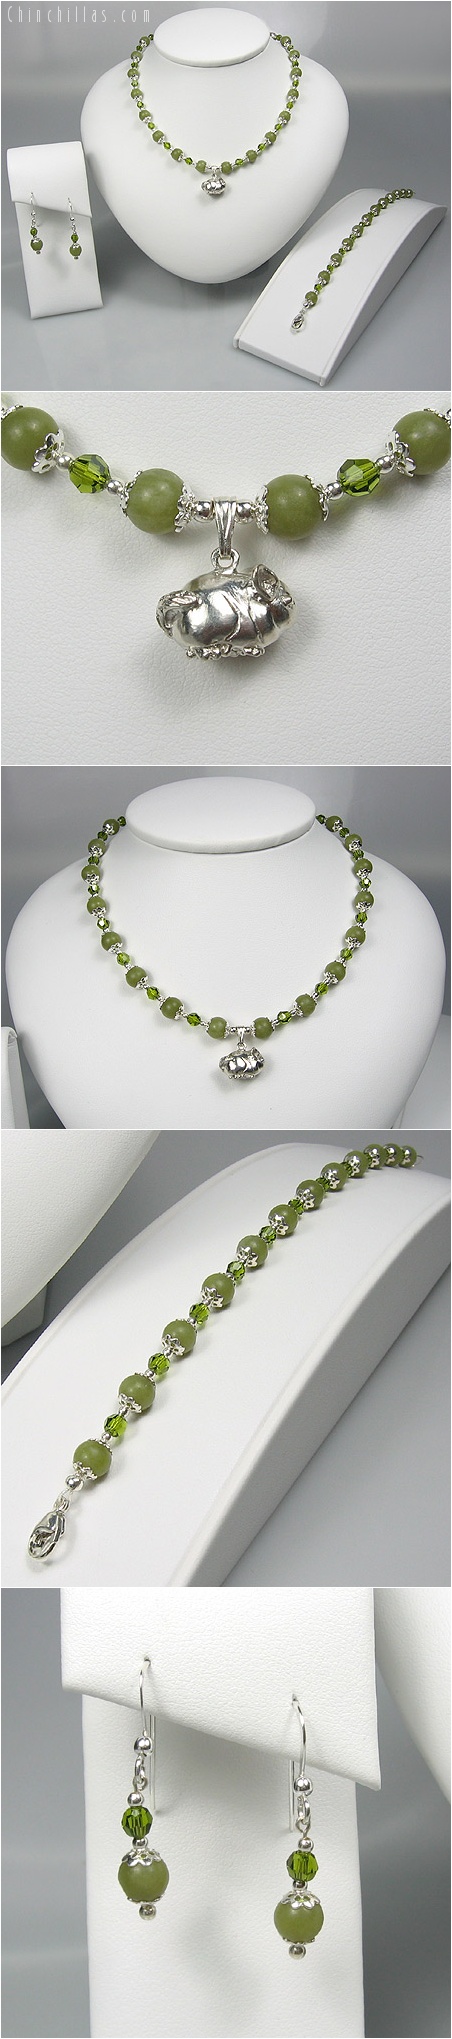 One of a Kind Silver & Jade Jewelry Set with Chinchilla Millennia IV